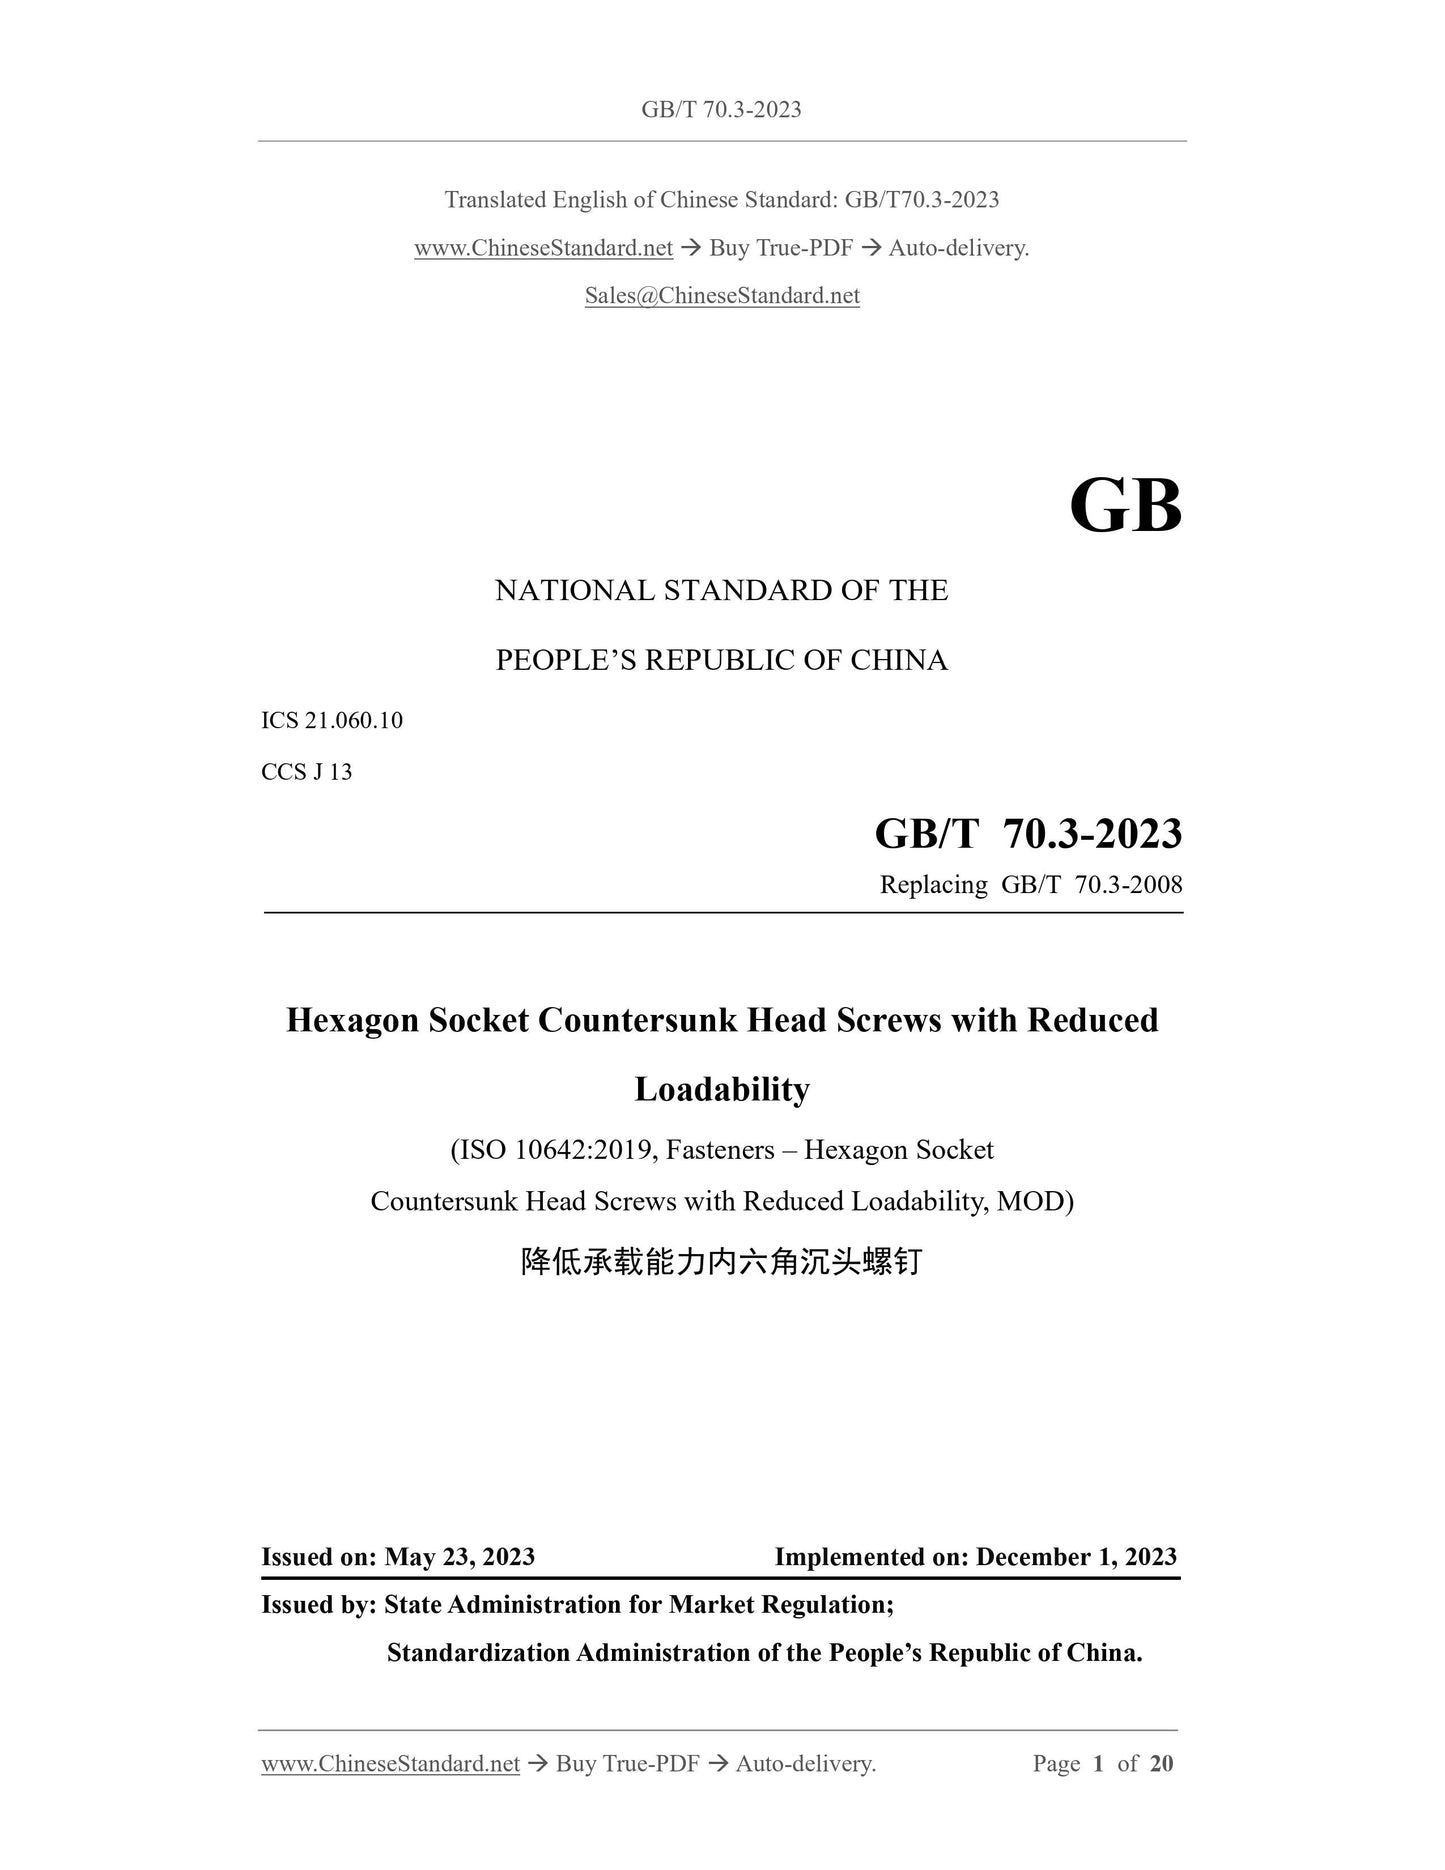 GB/T 70.3-2023 Page 1